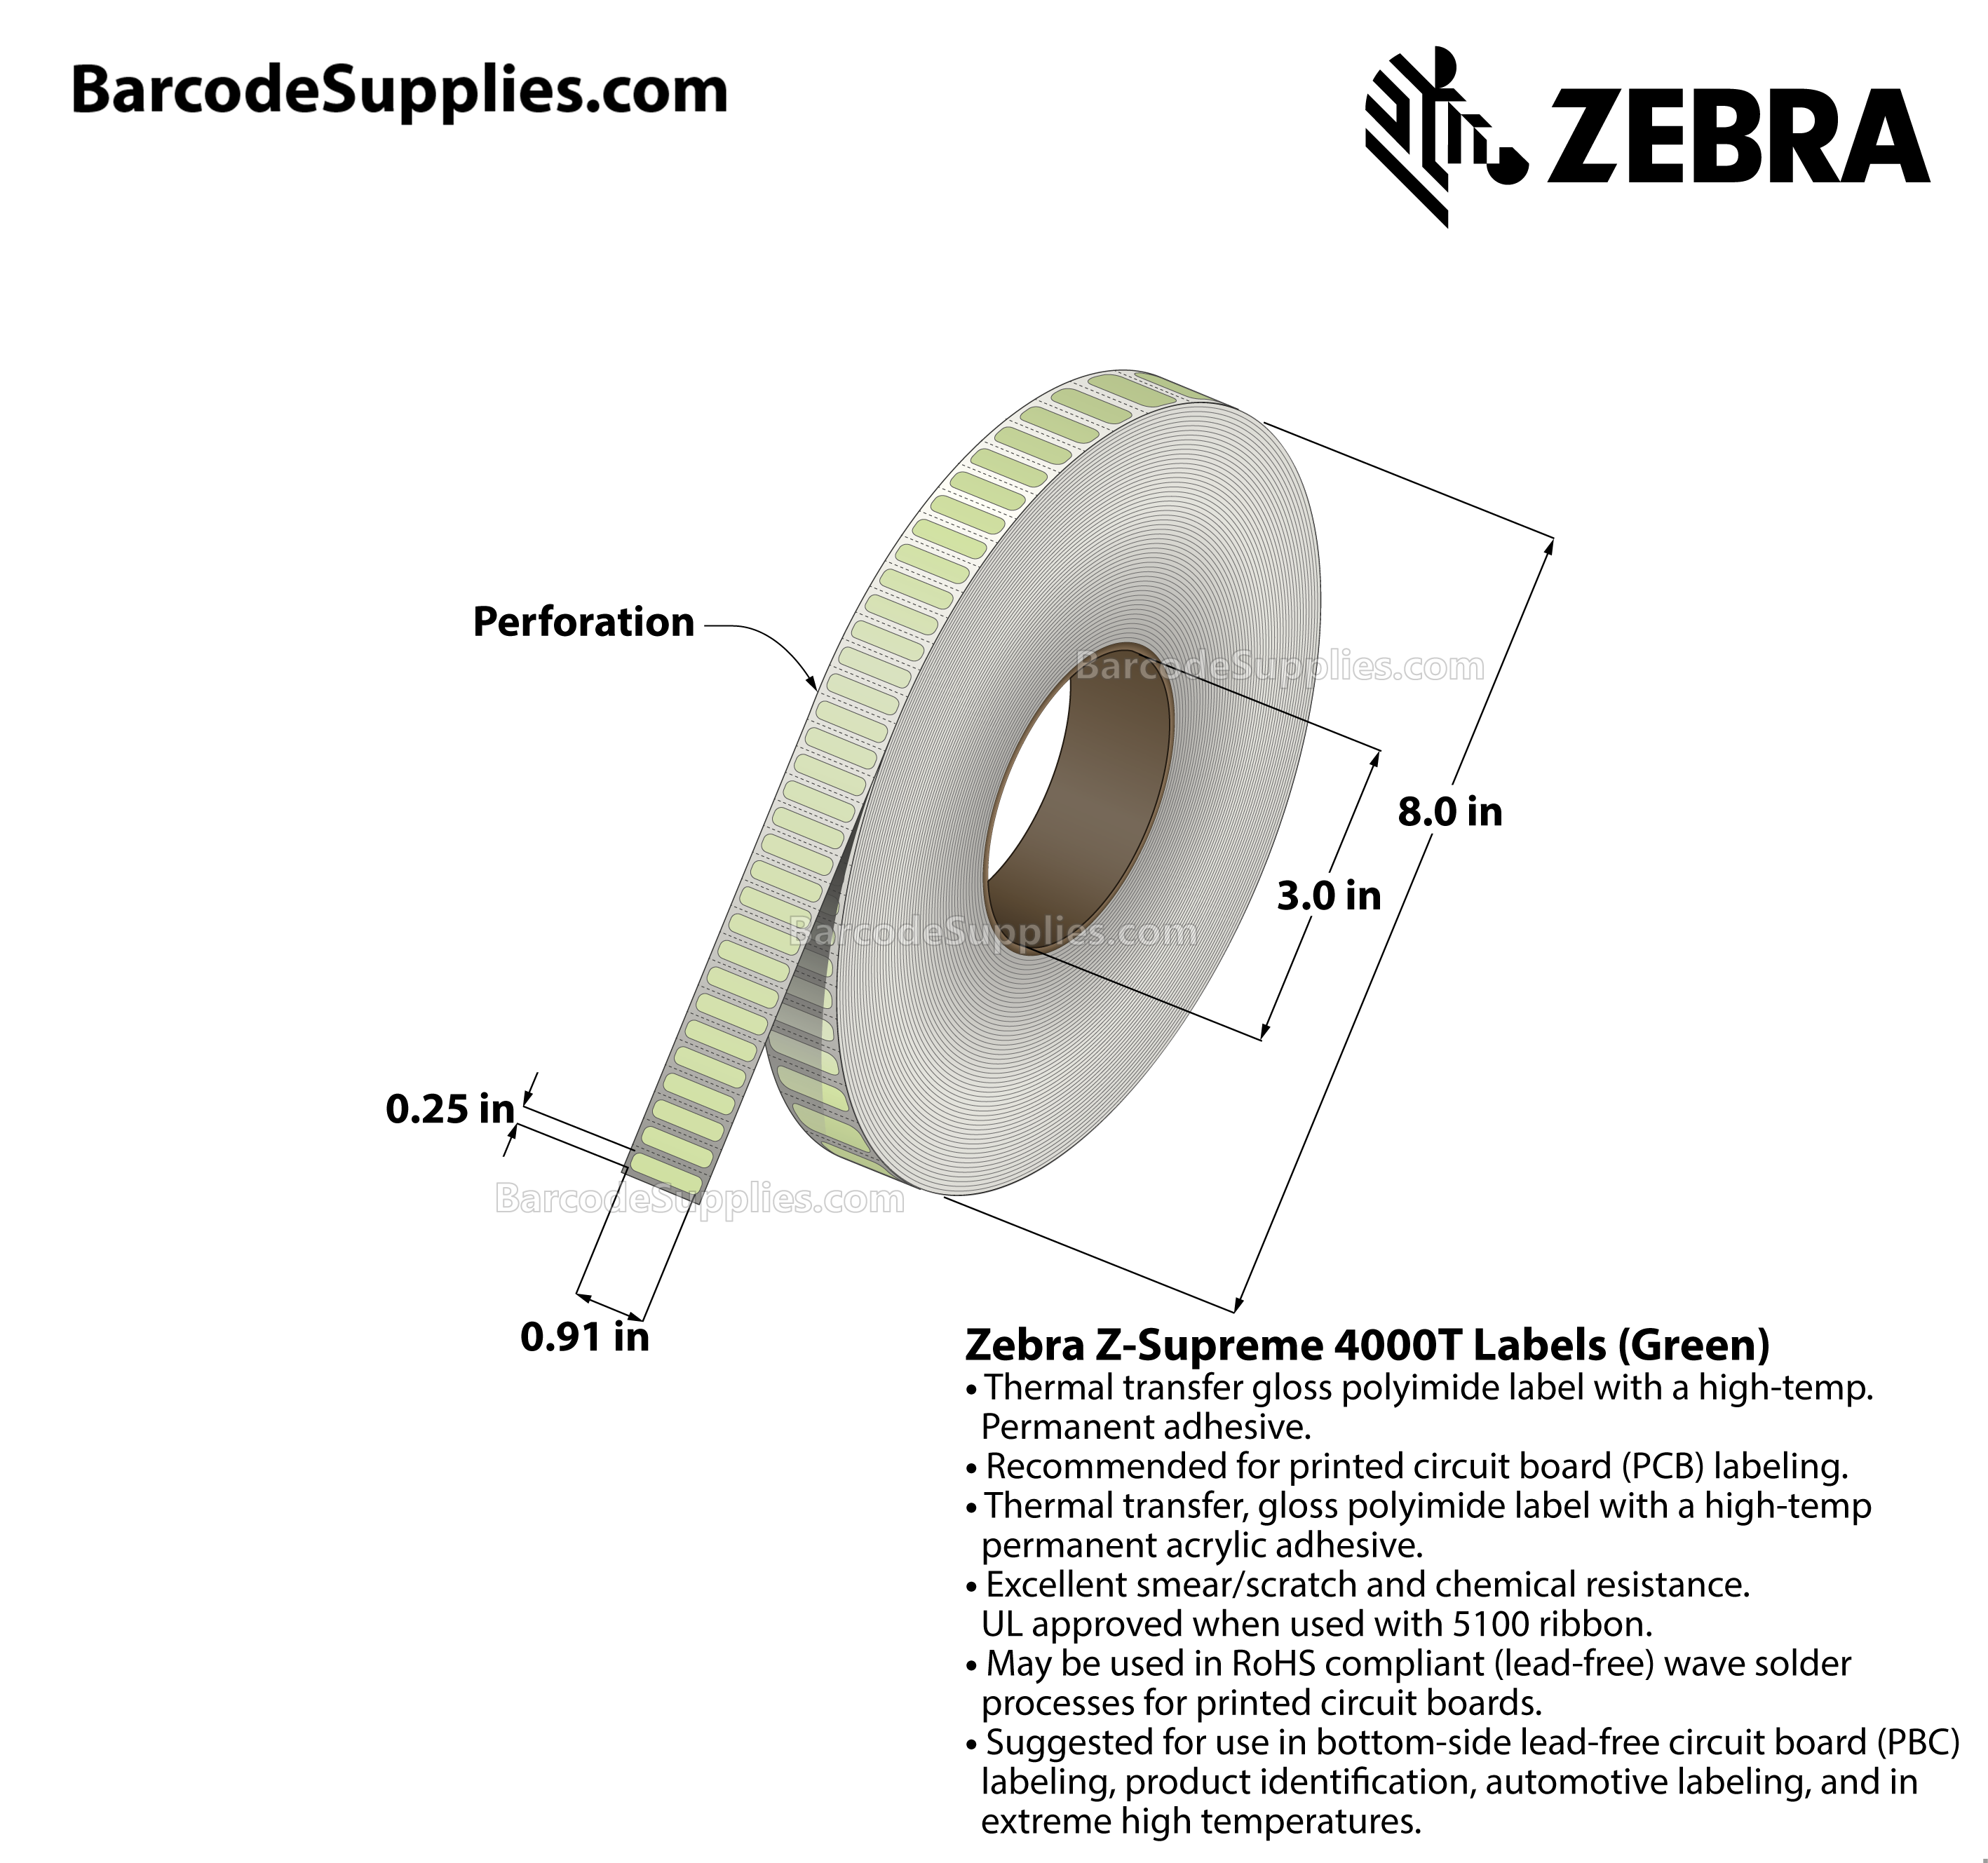 0.91 x 0.25 Thermal Transfer Green Z-Supreme 4000T Green Labels With High-temp Adhesive - Perforated - 10000 Labels Per Roll - Carton Of 1 Rolls - 10000 Labels Total - MPN: 10023314